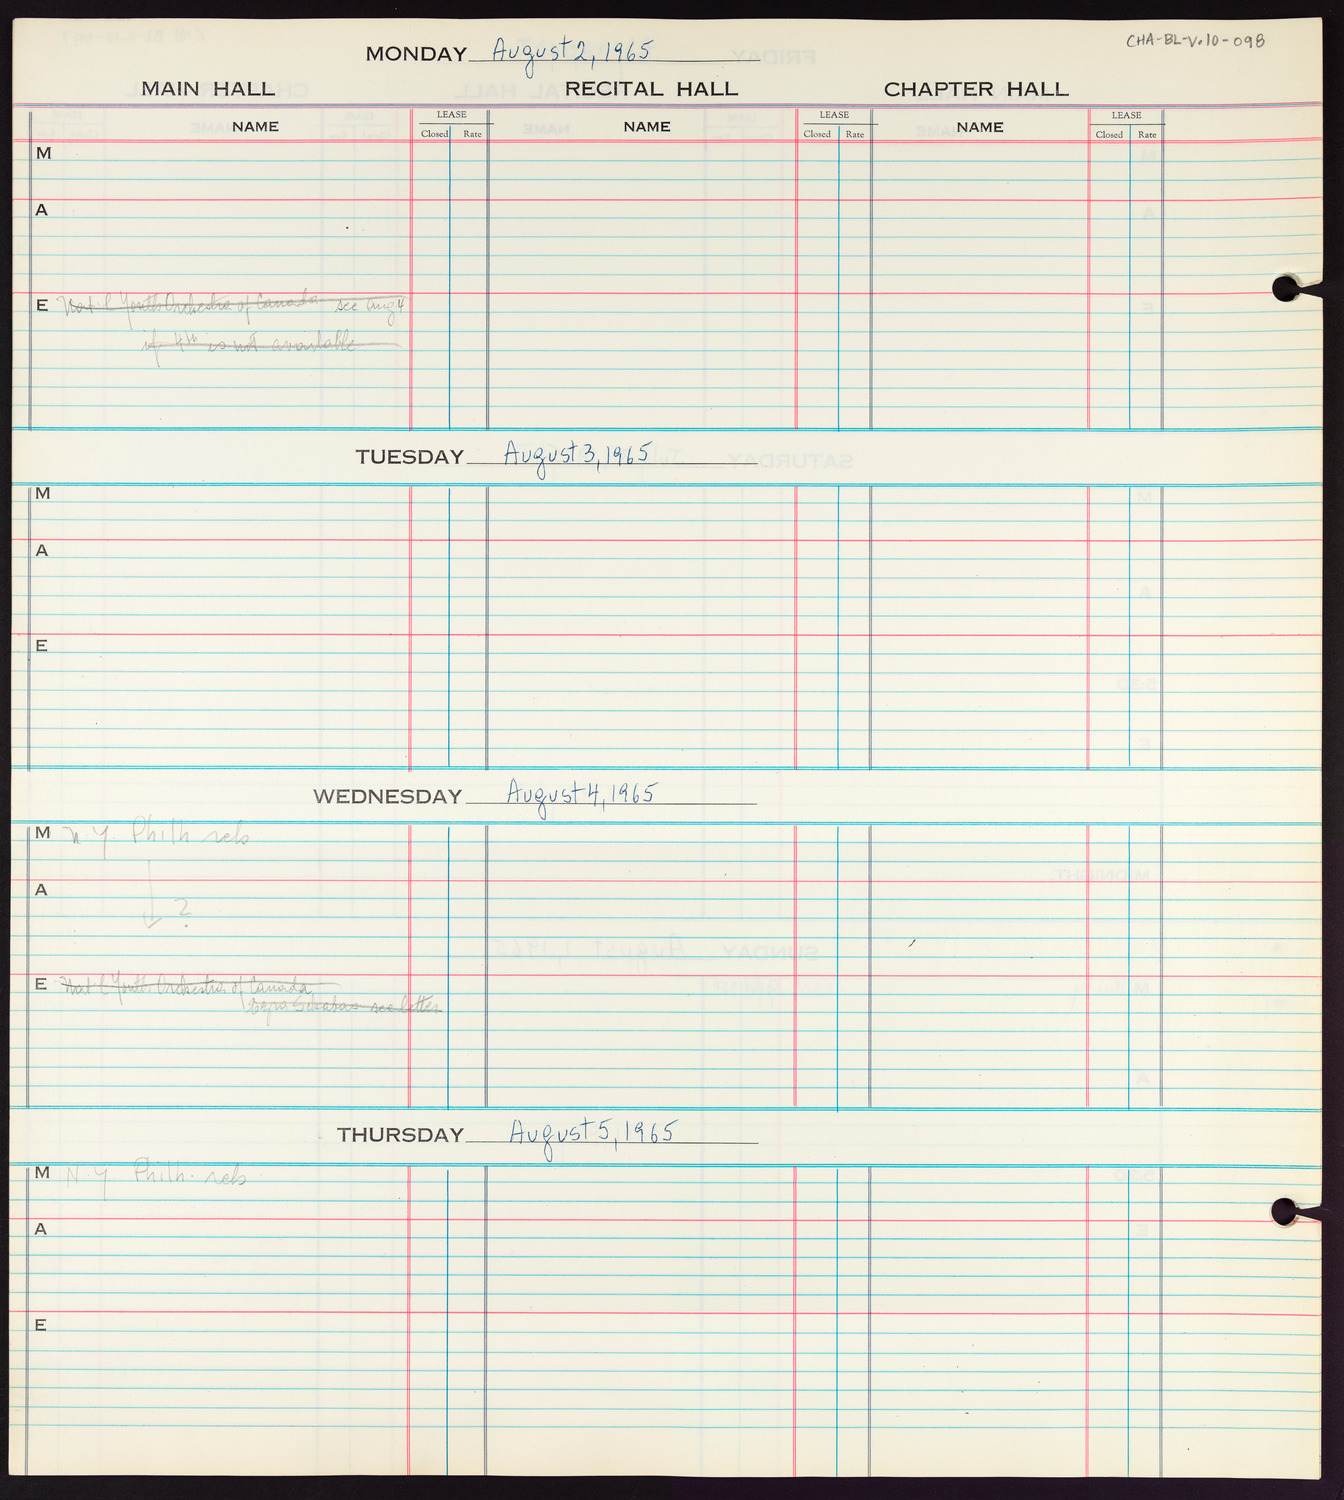 Carnegie Hall Booking Ledger, volume 10, page 98